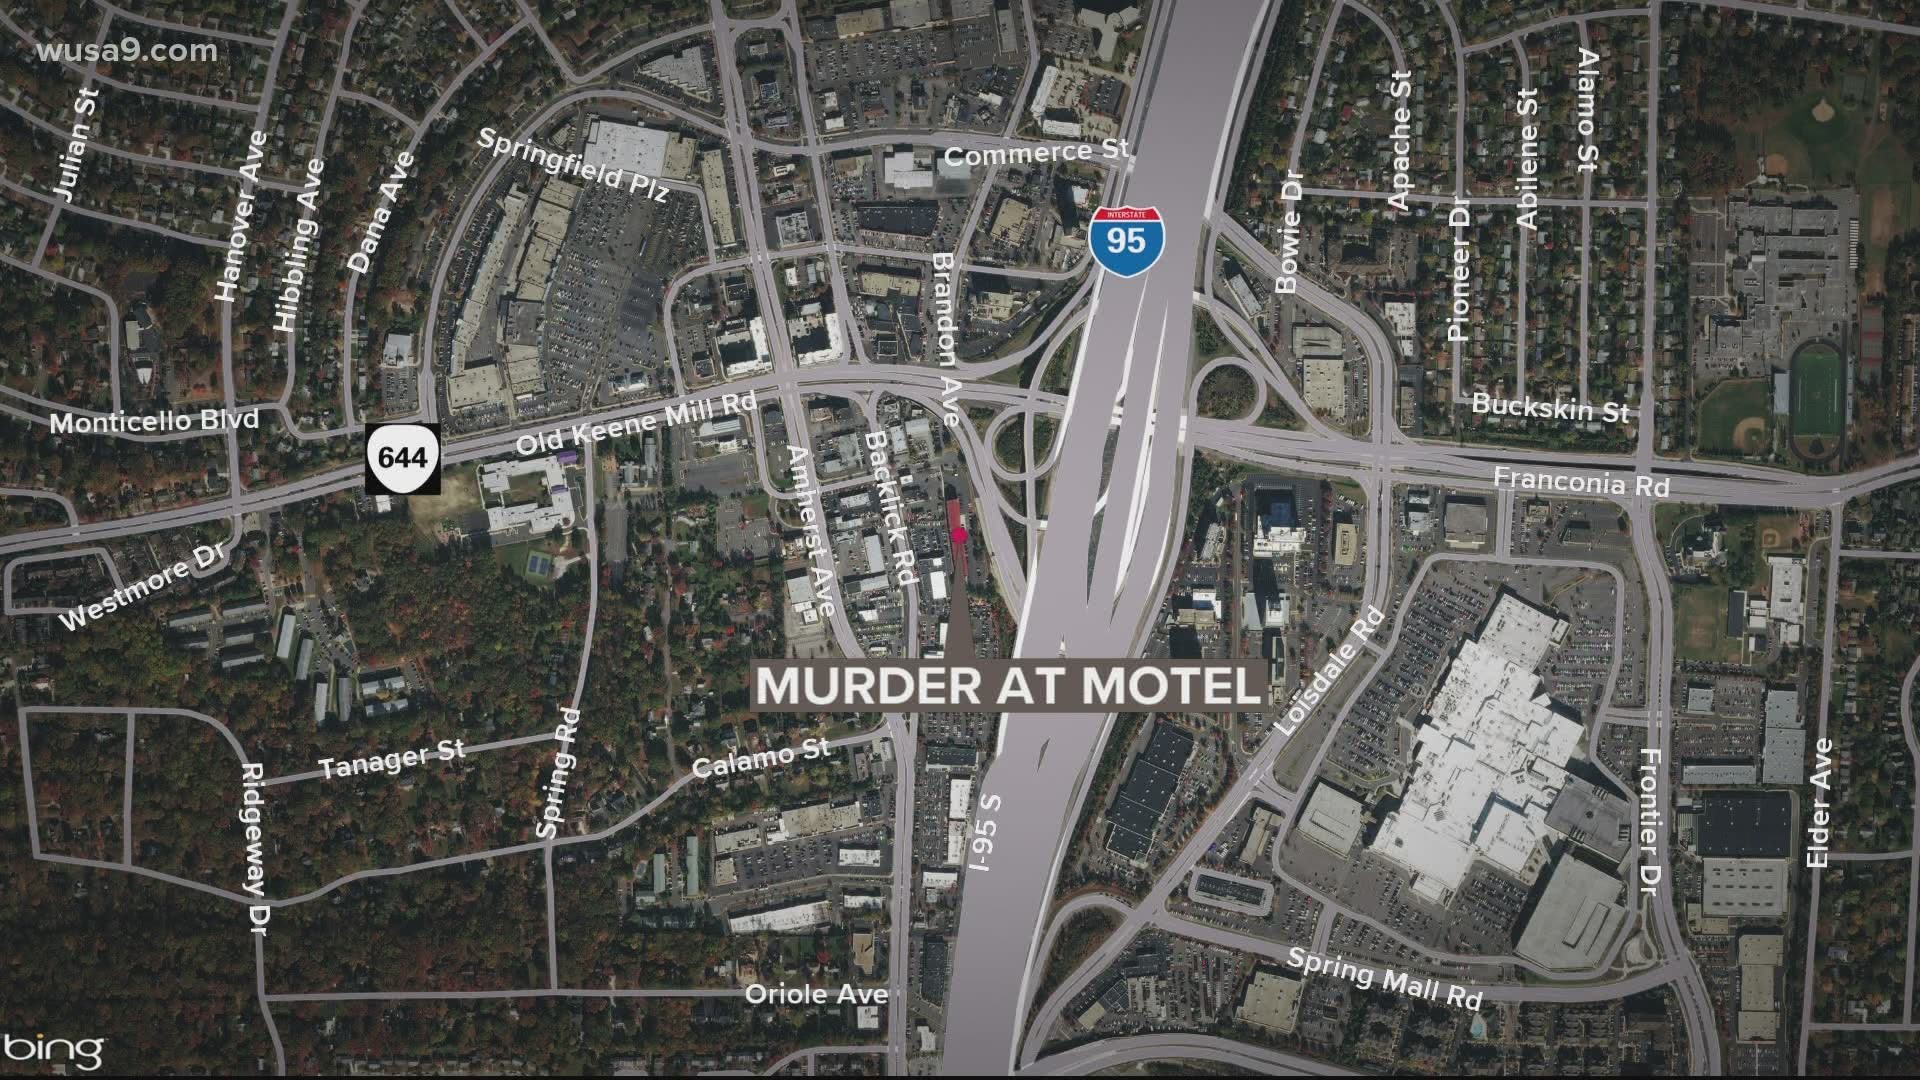 A juvenile male was found dead in a motel room in Springfield and police are investigating the incident as a homicide, Fairfax County Police Department said.